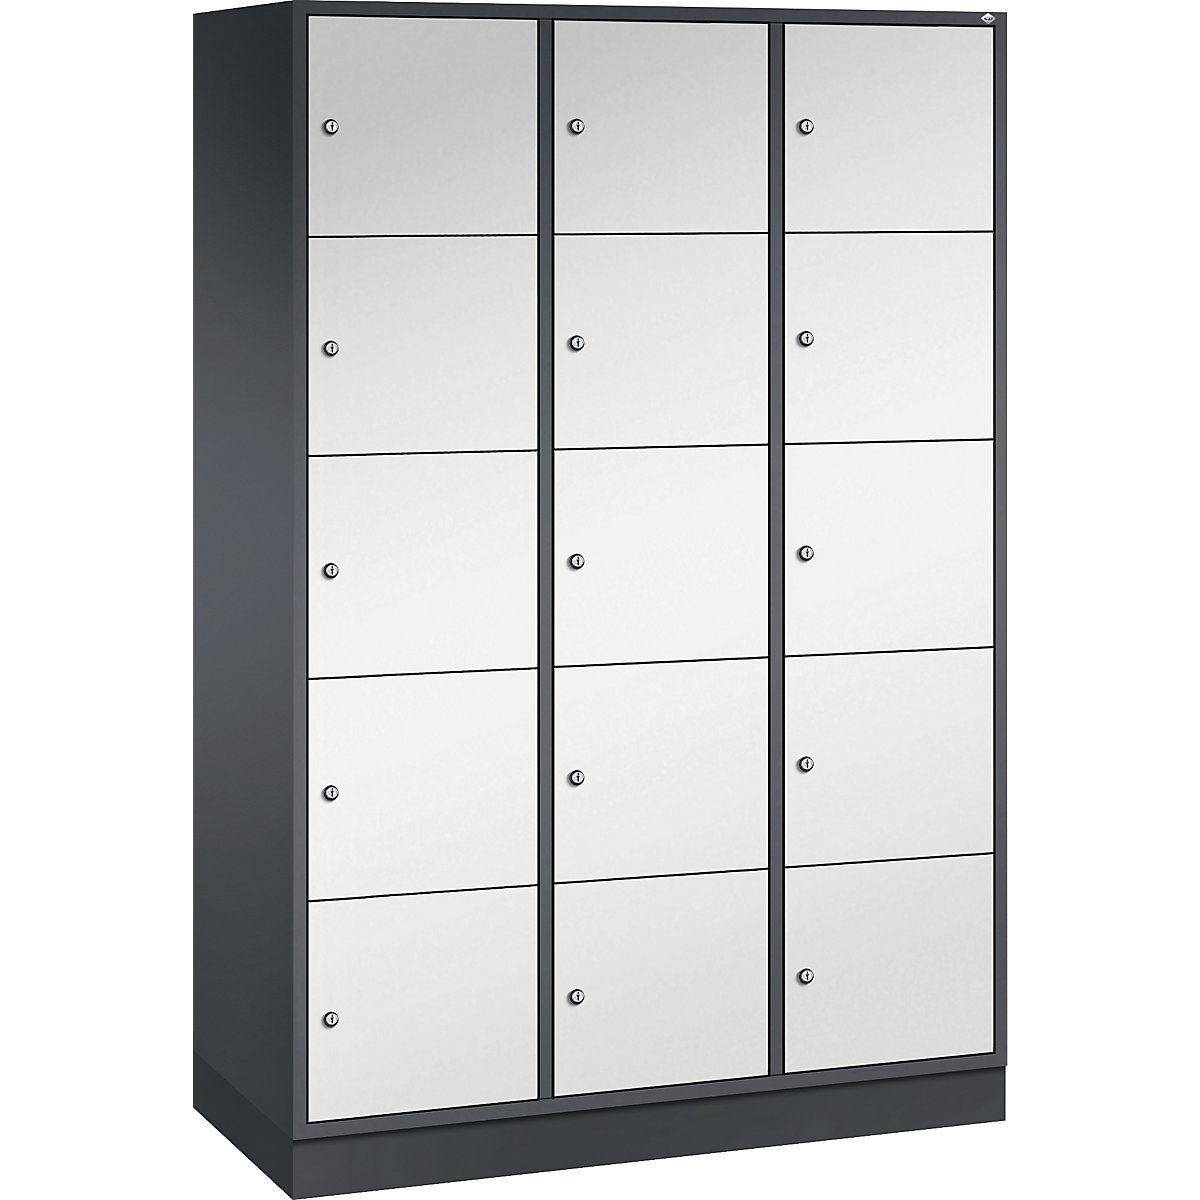 INTRO steel compartment locker, compartment height 345 mm – C+P, WxD 1220 x 500 mm, 15 compartments, black grey body, light grey doors